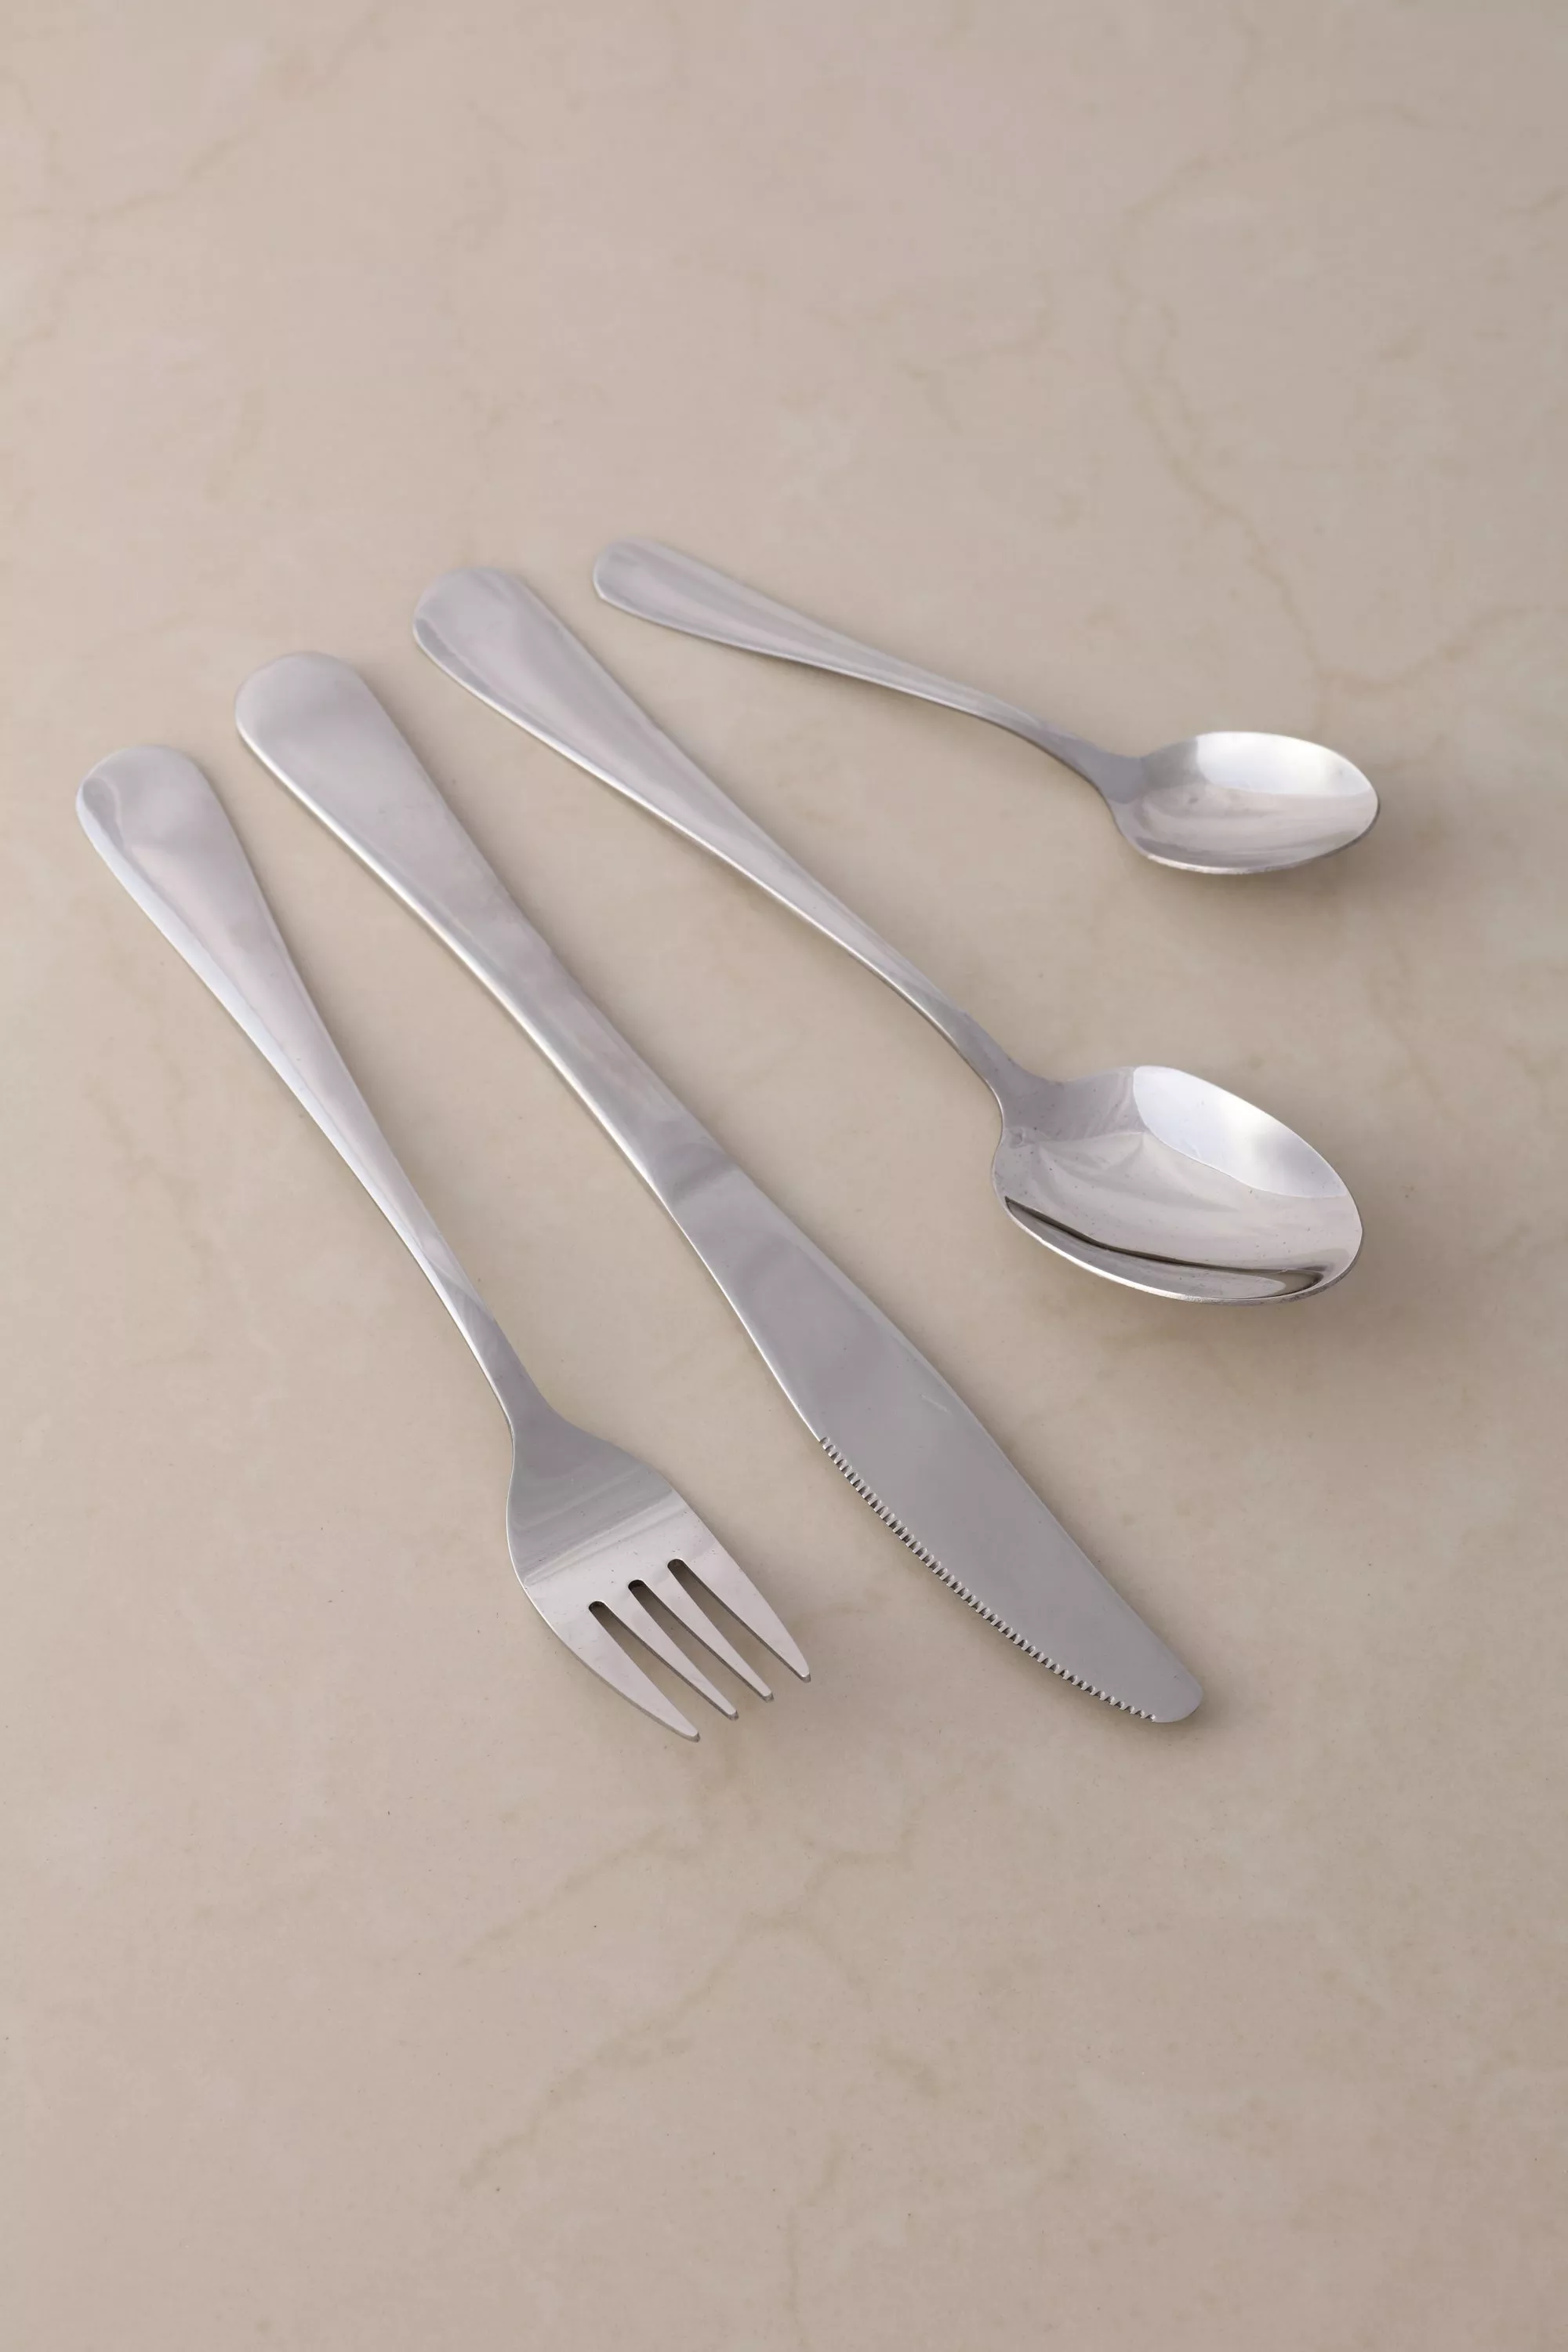 24 Piece Stainless Steel Cutlery Set | Mr Price Home